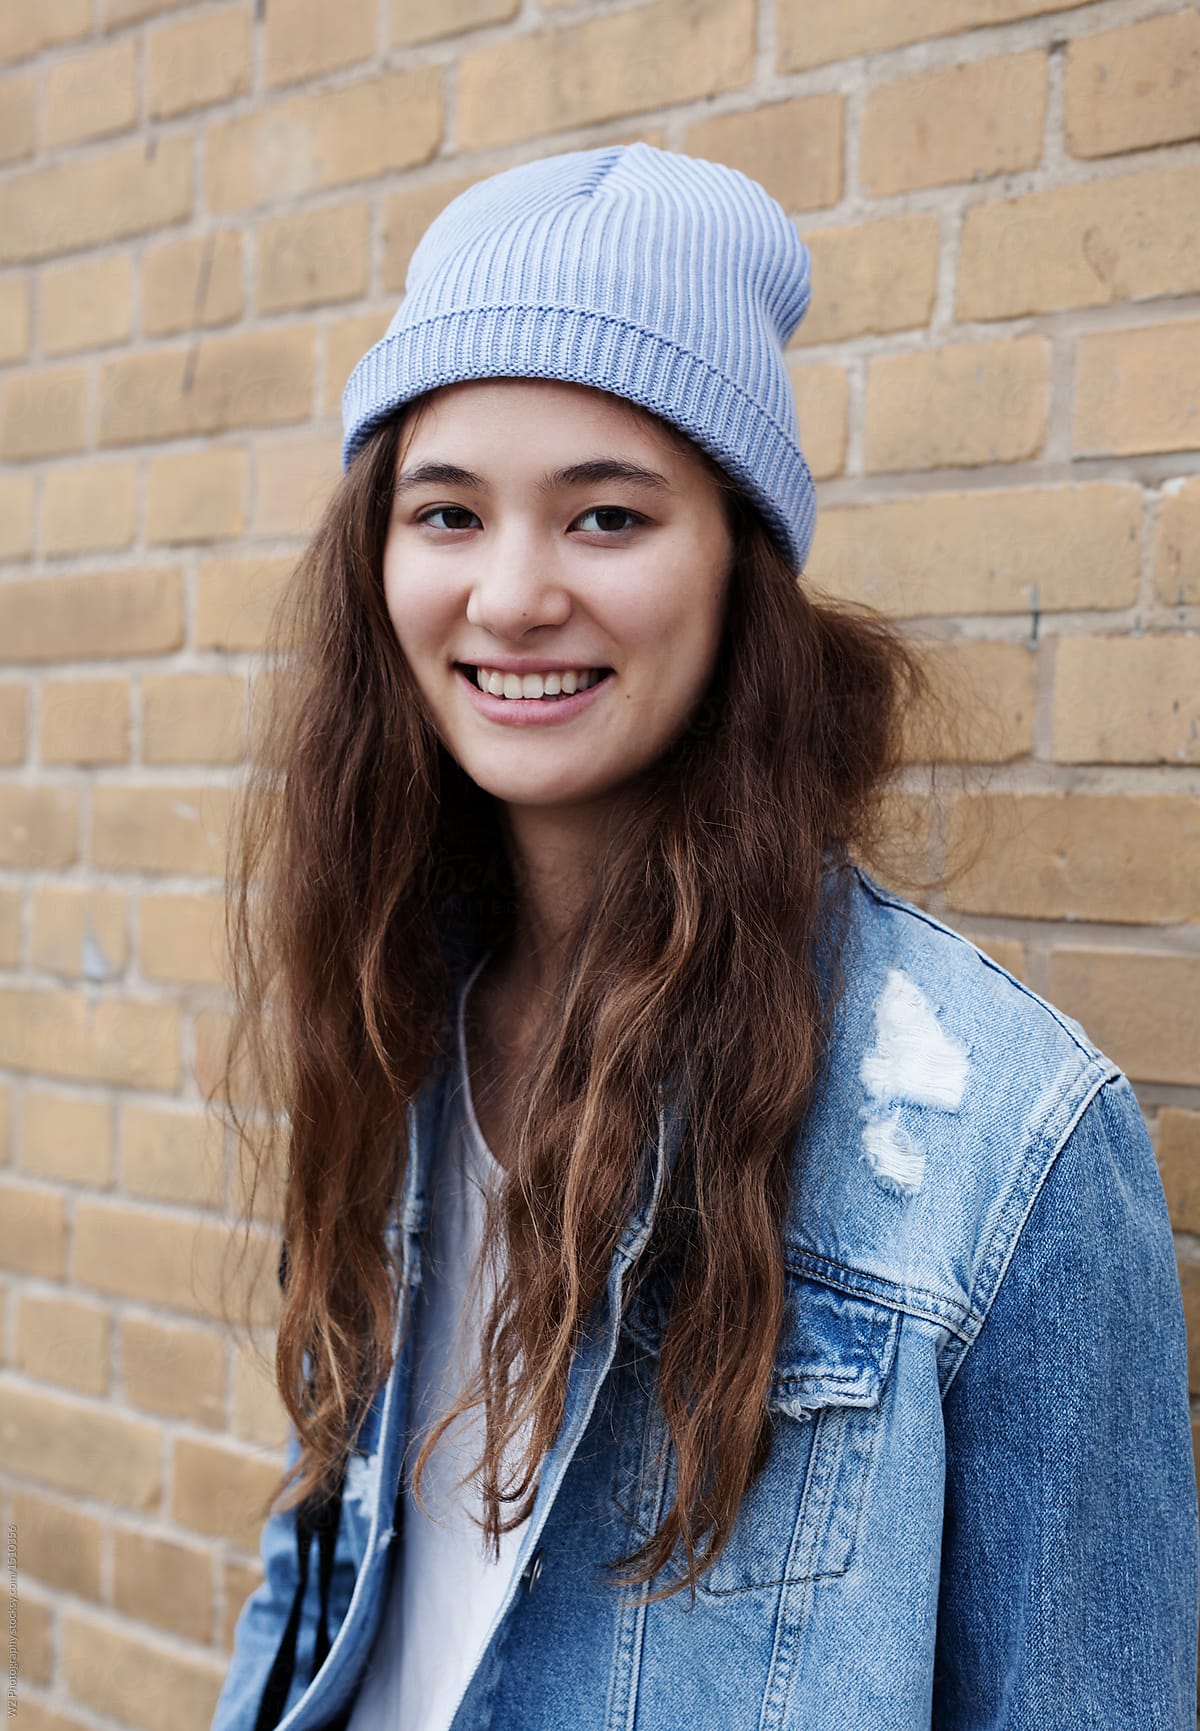 A smiling young woman against a brick wall.